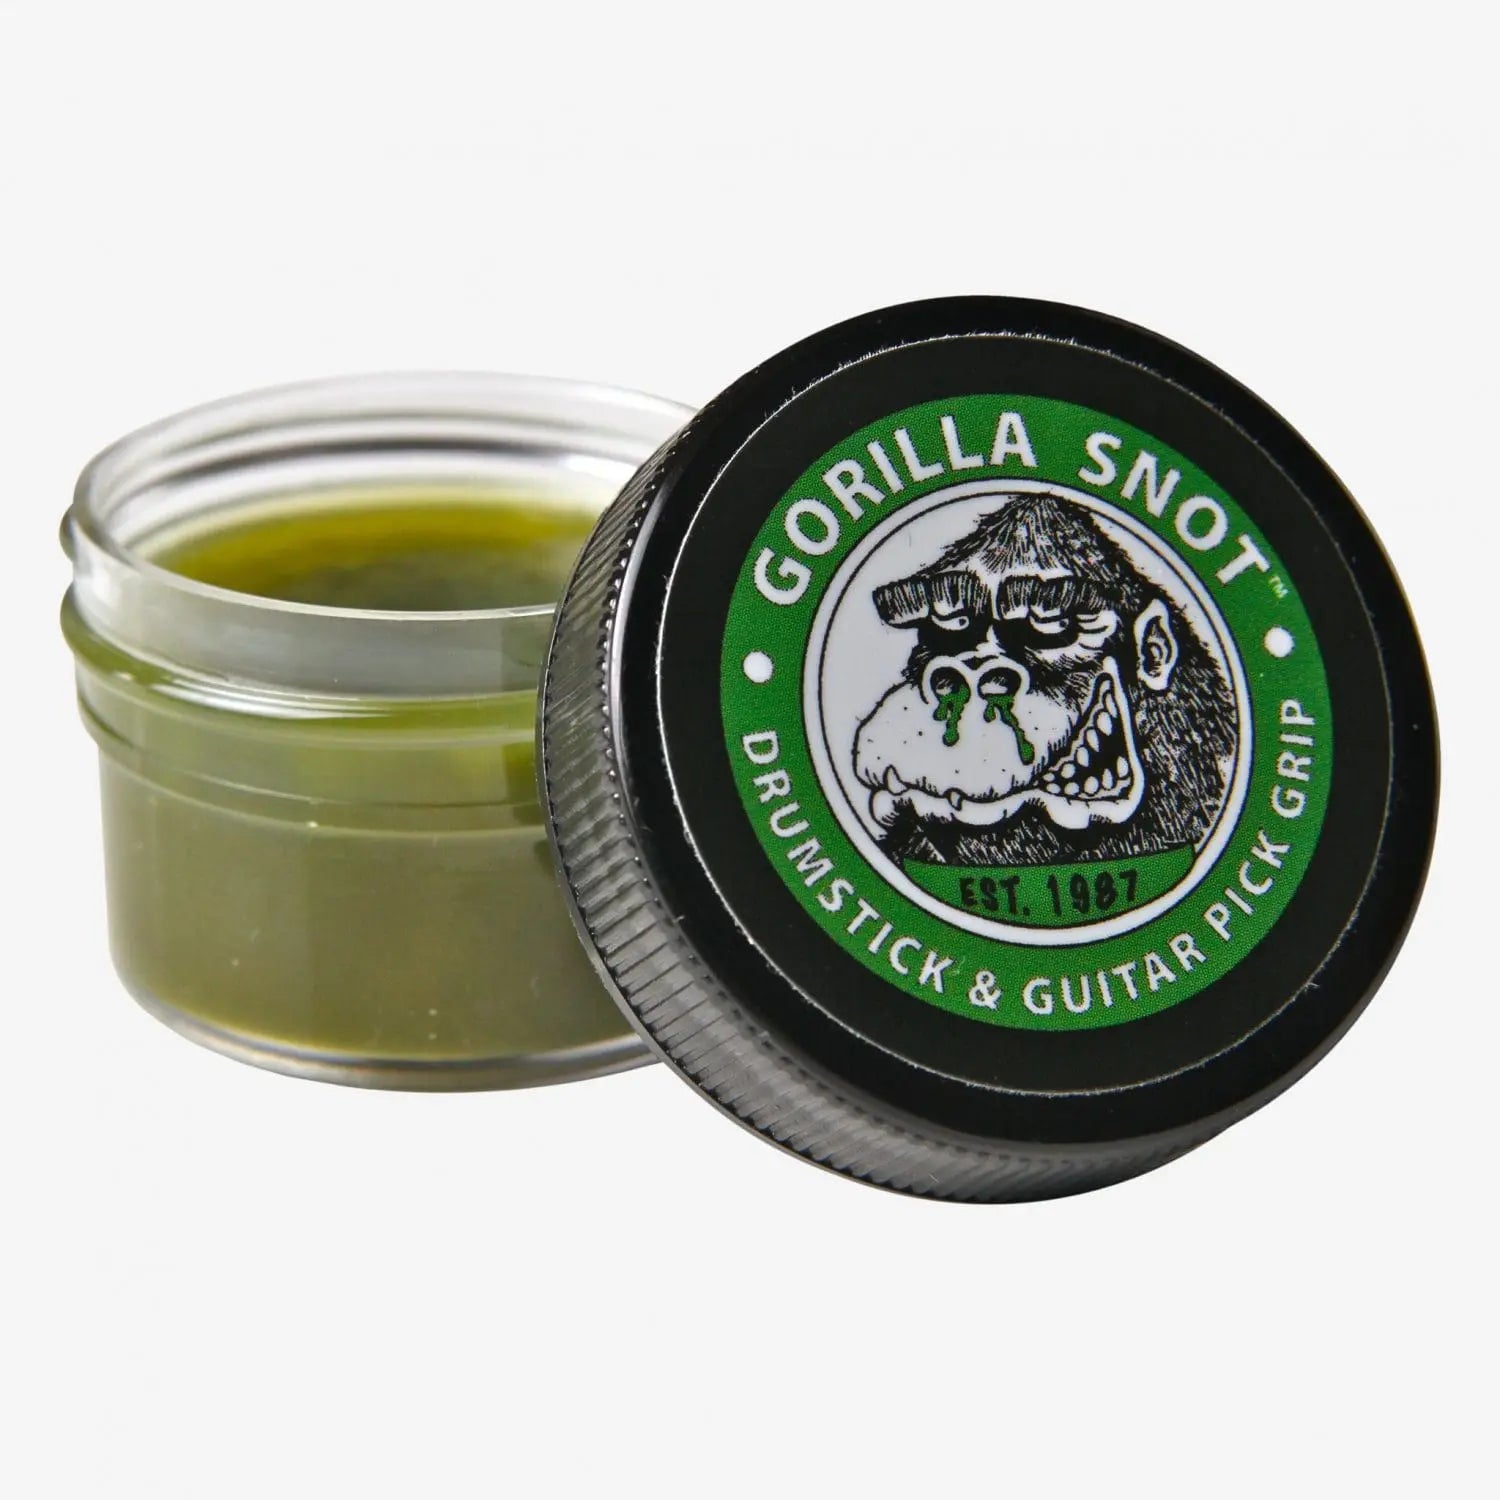 Open jar of Gorilla Traction Gel, a green gripping aid for drumstick and guitar pick grip, with its lid showing a gorilla logo next to it.